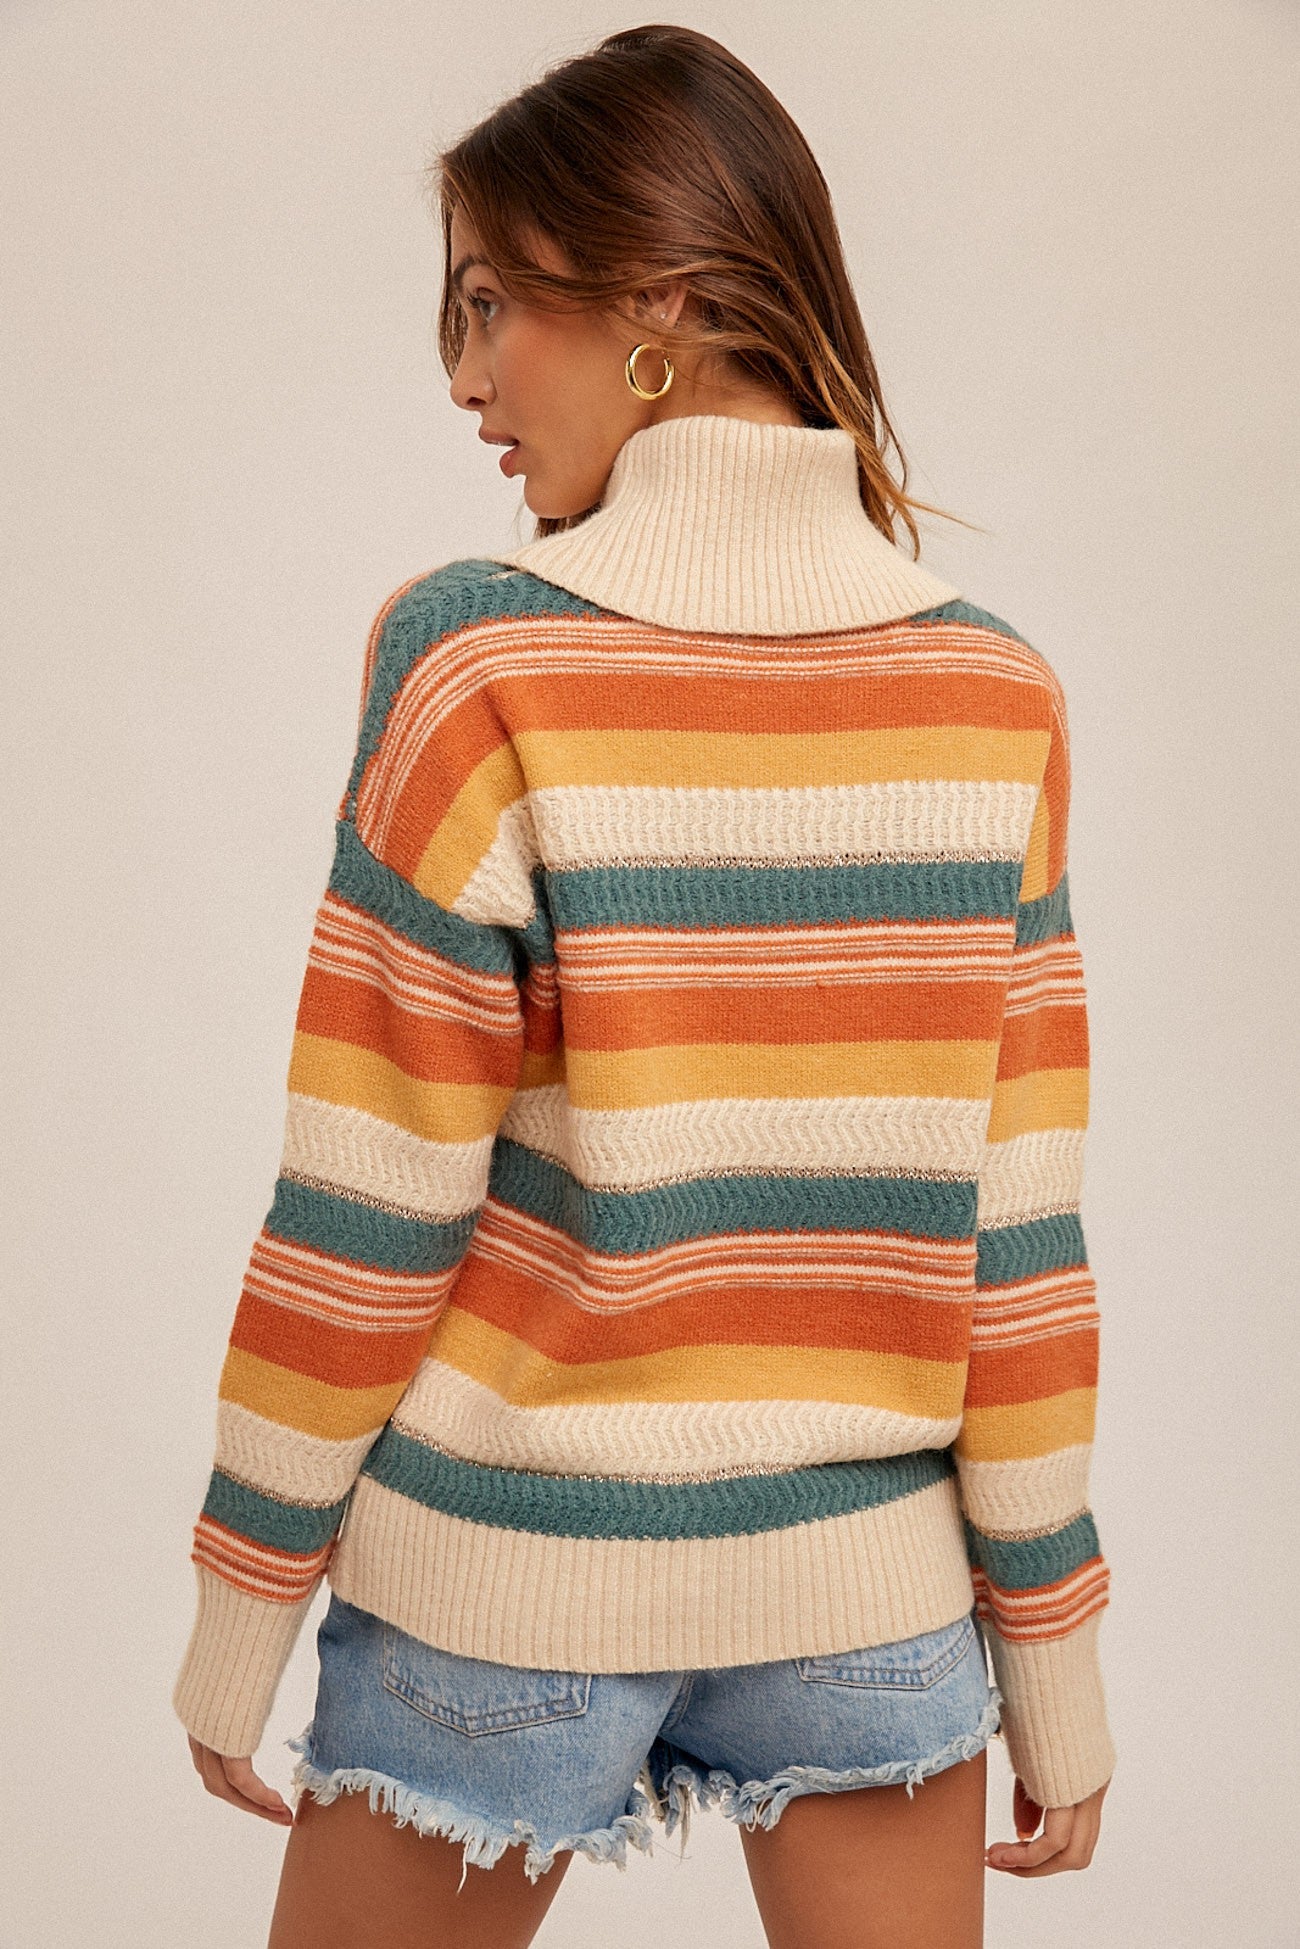 The Janelle Striped Turtle Neck Sweater